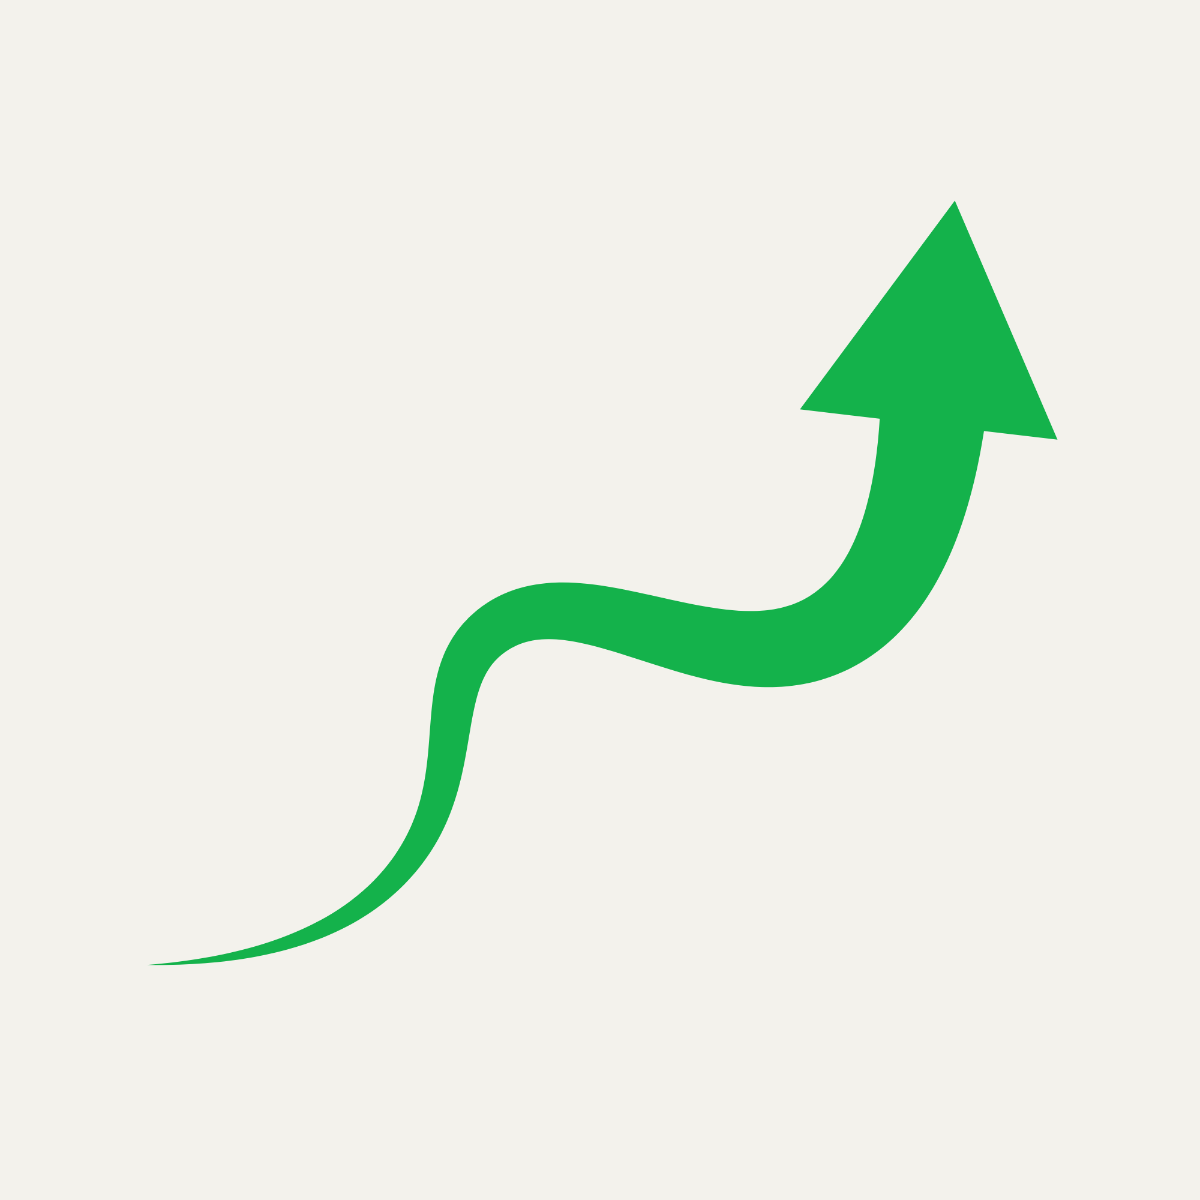 Green Curved Arrow Vector Template